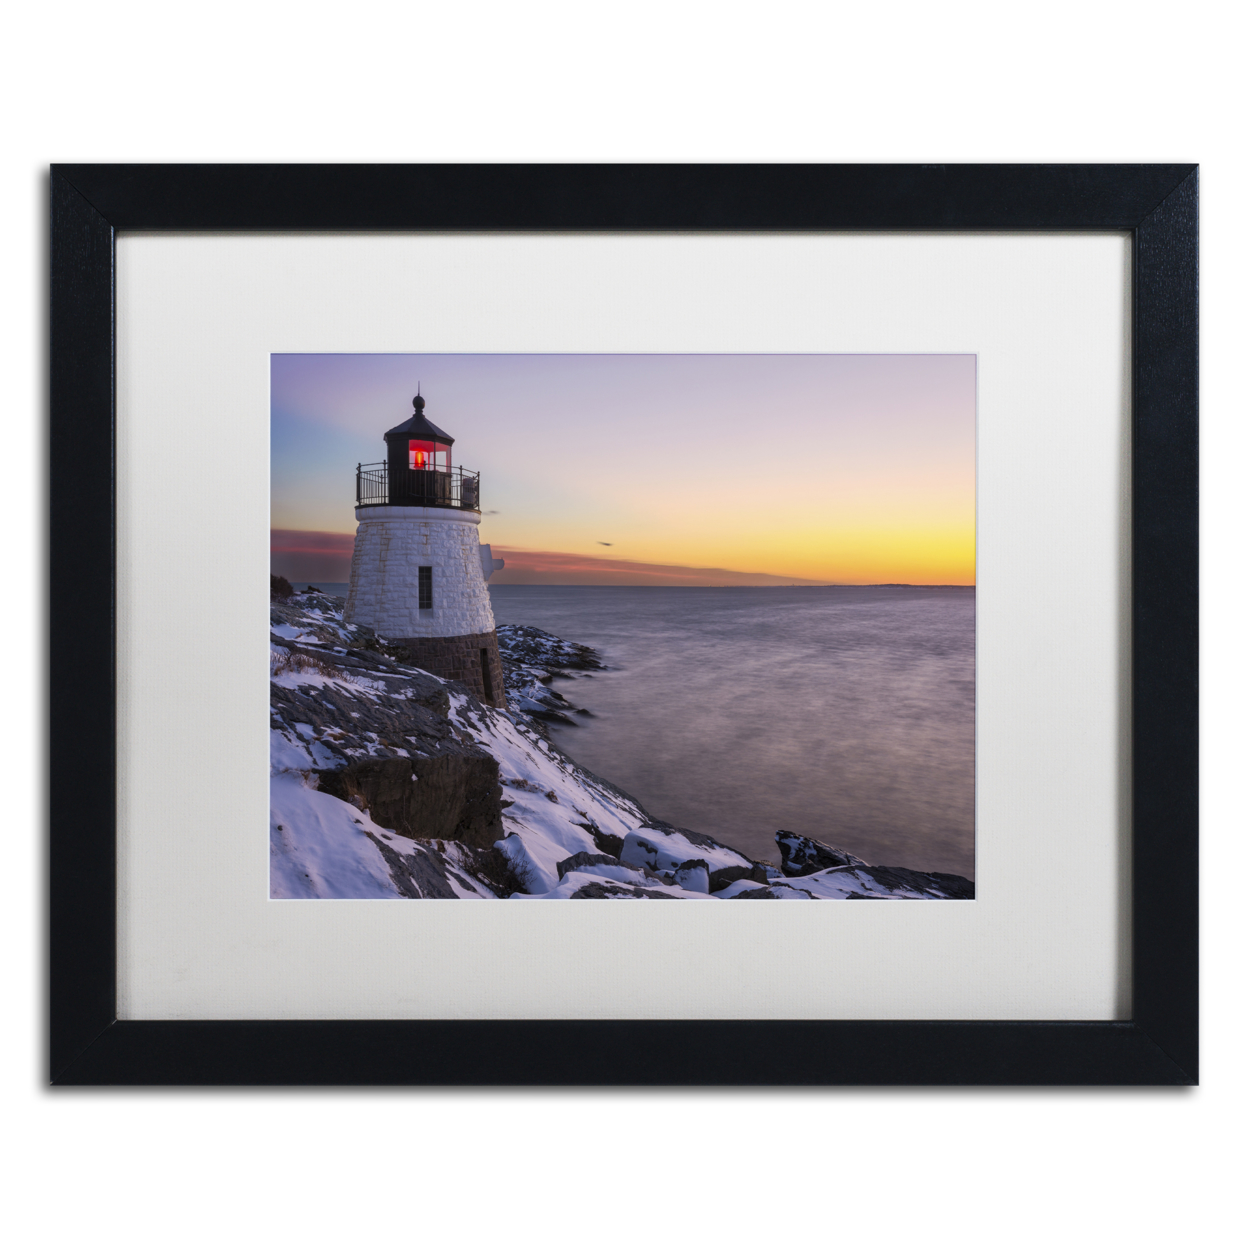 Michael Blanchette Photography 'Light On The Bay' Black Wooden Framed Art 18 X 22 Inches